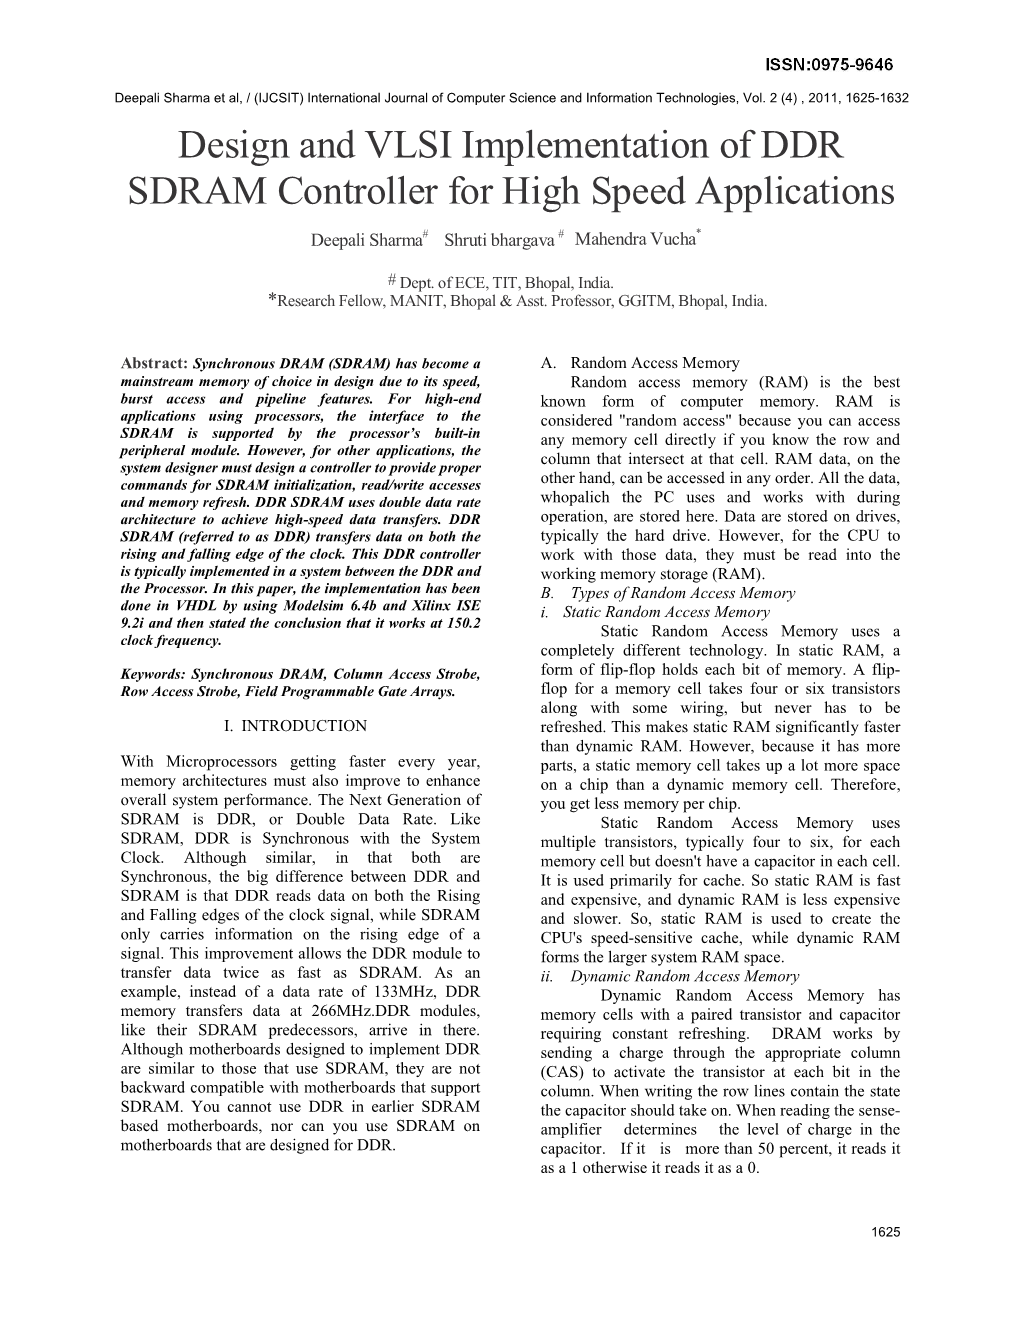 Design and VLSI Implementation of DDR SDRAM Controller for High Speed Applications